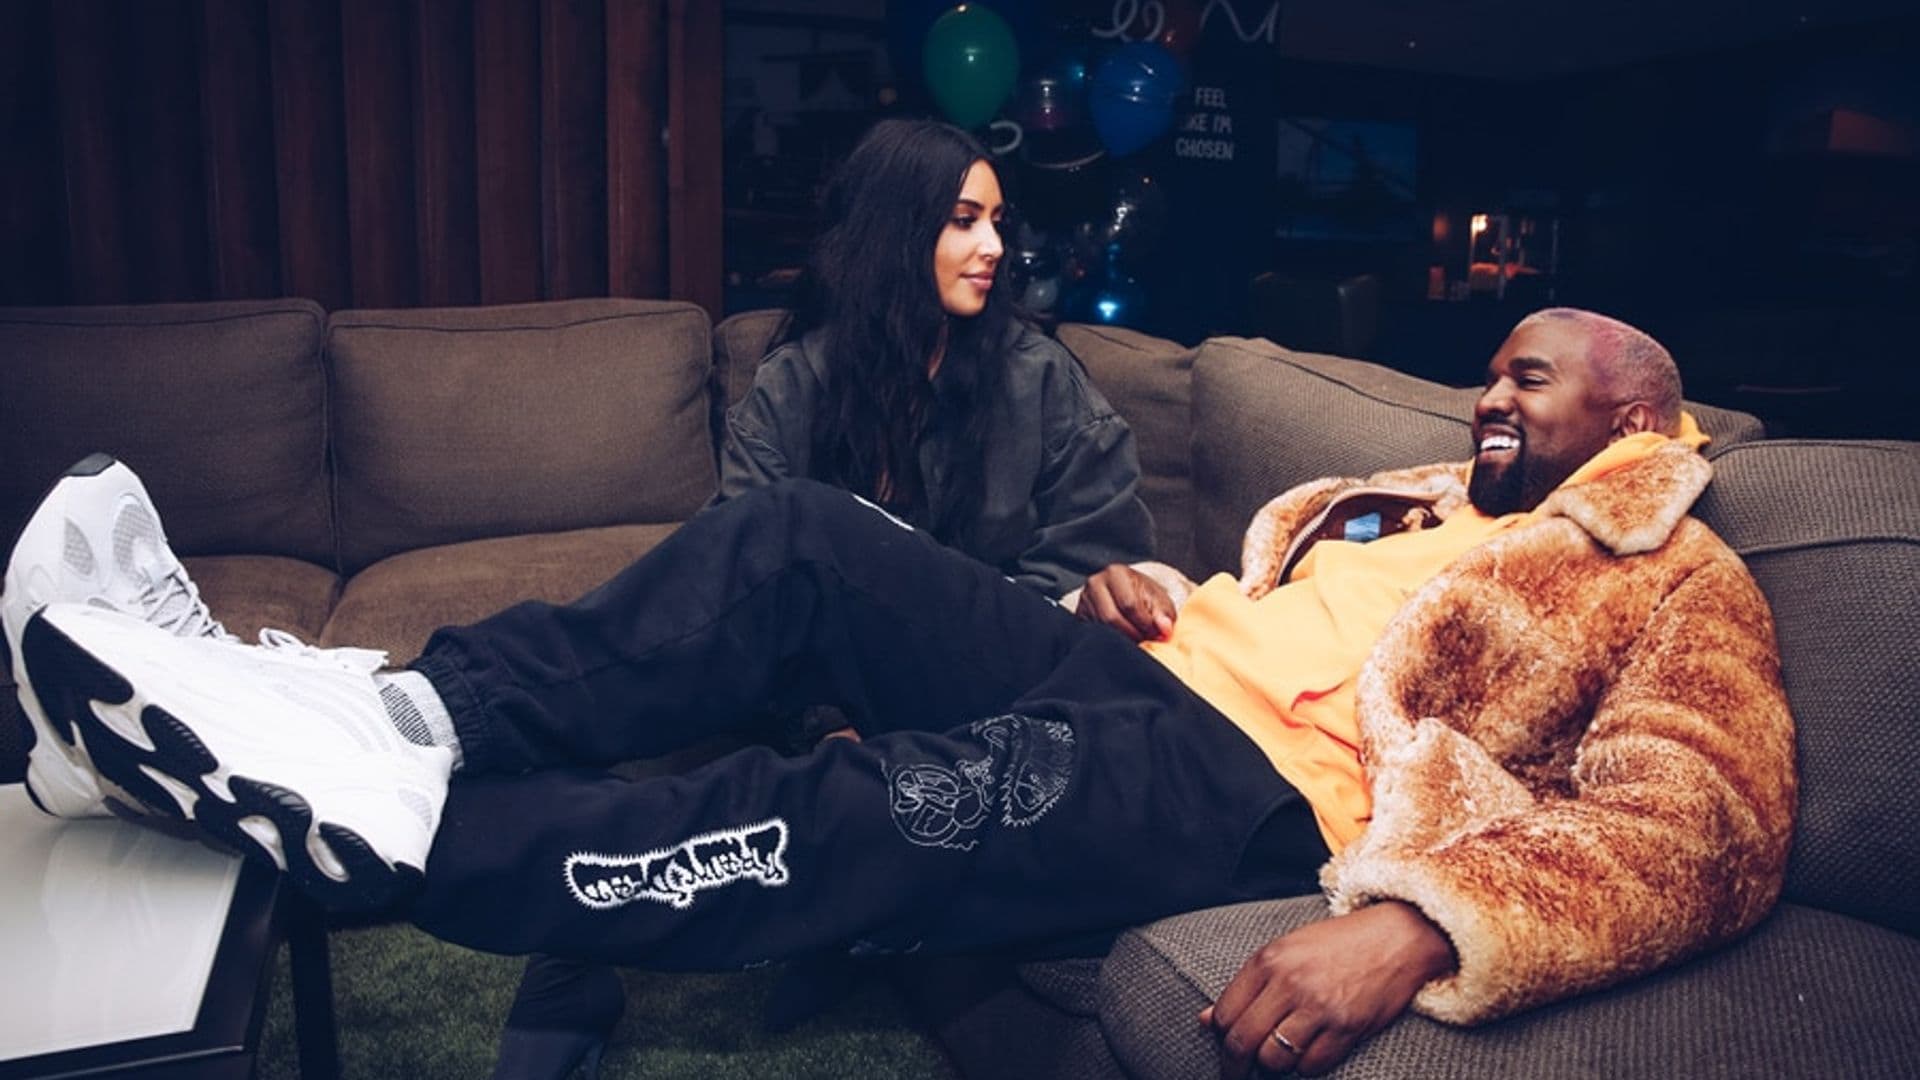 Kanye got the most unexpected artist to appear in Kim K's living room for Valentine's Day